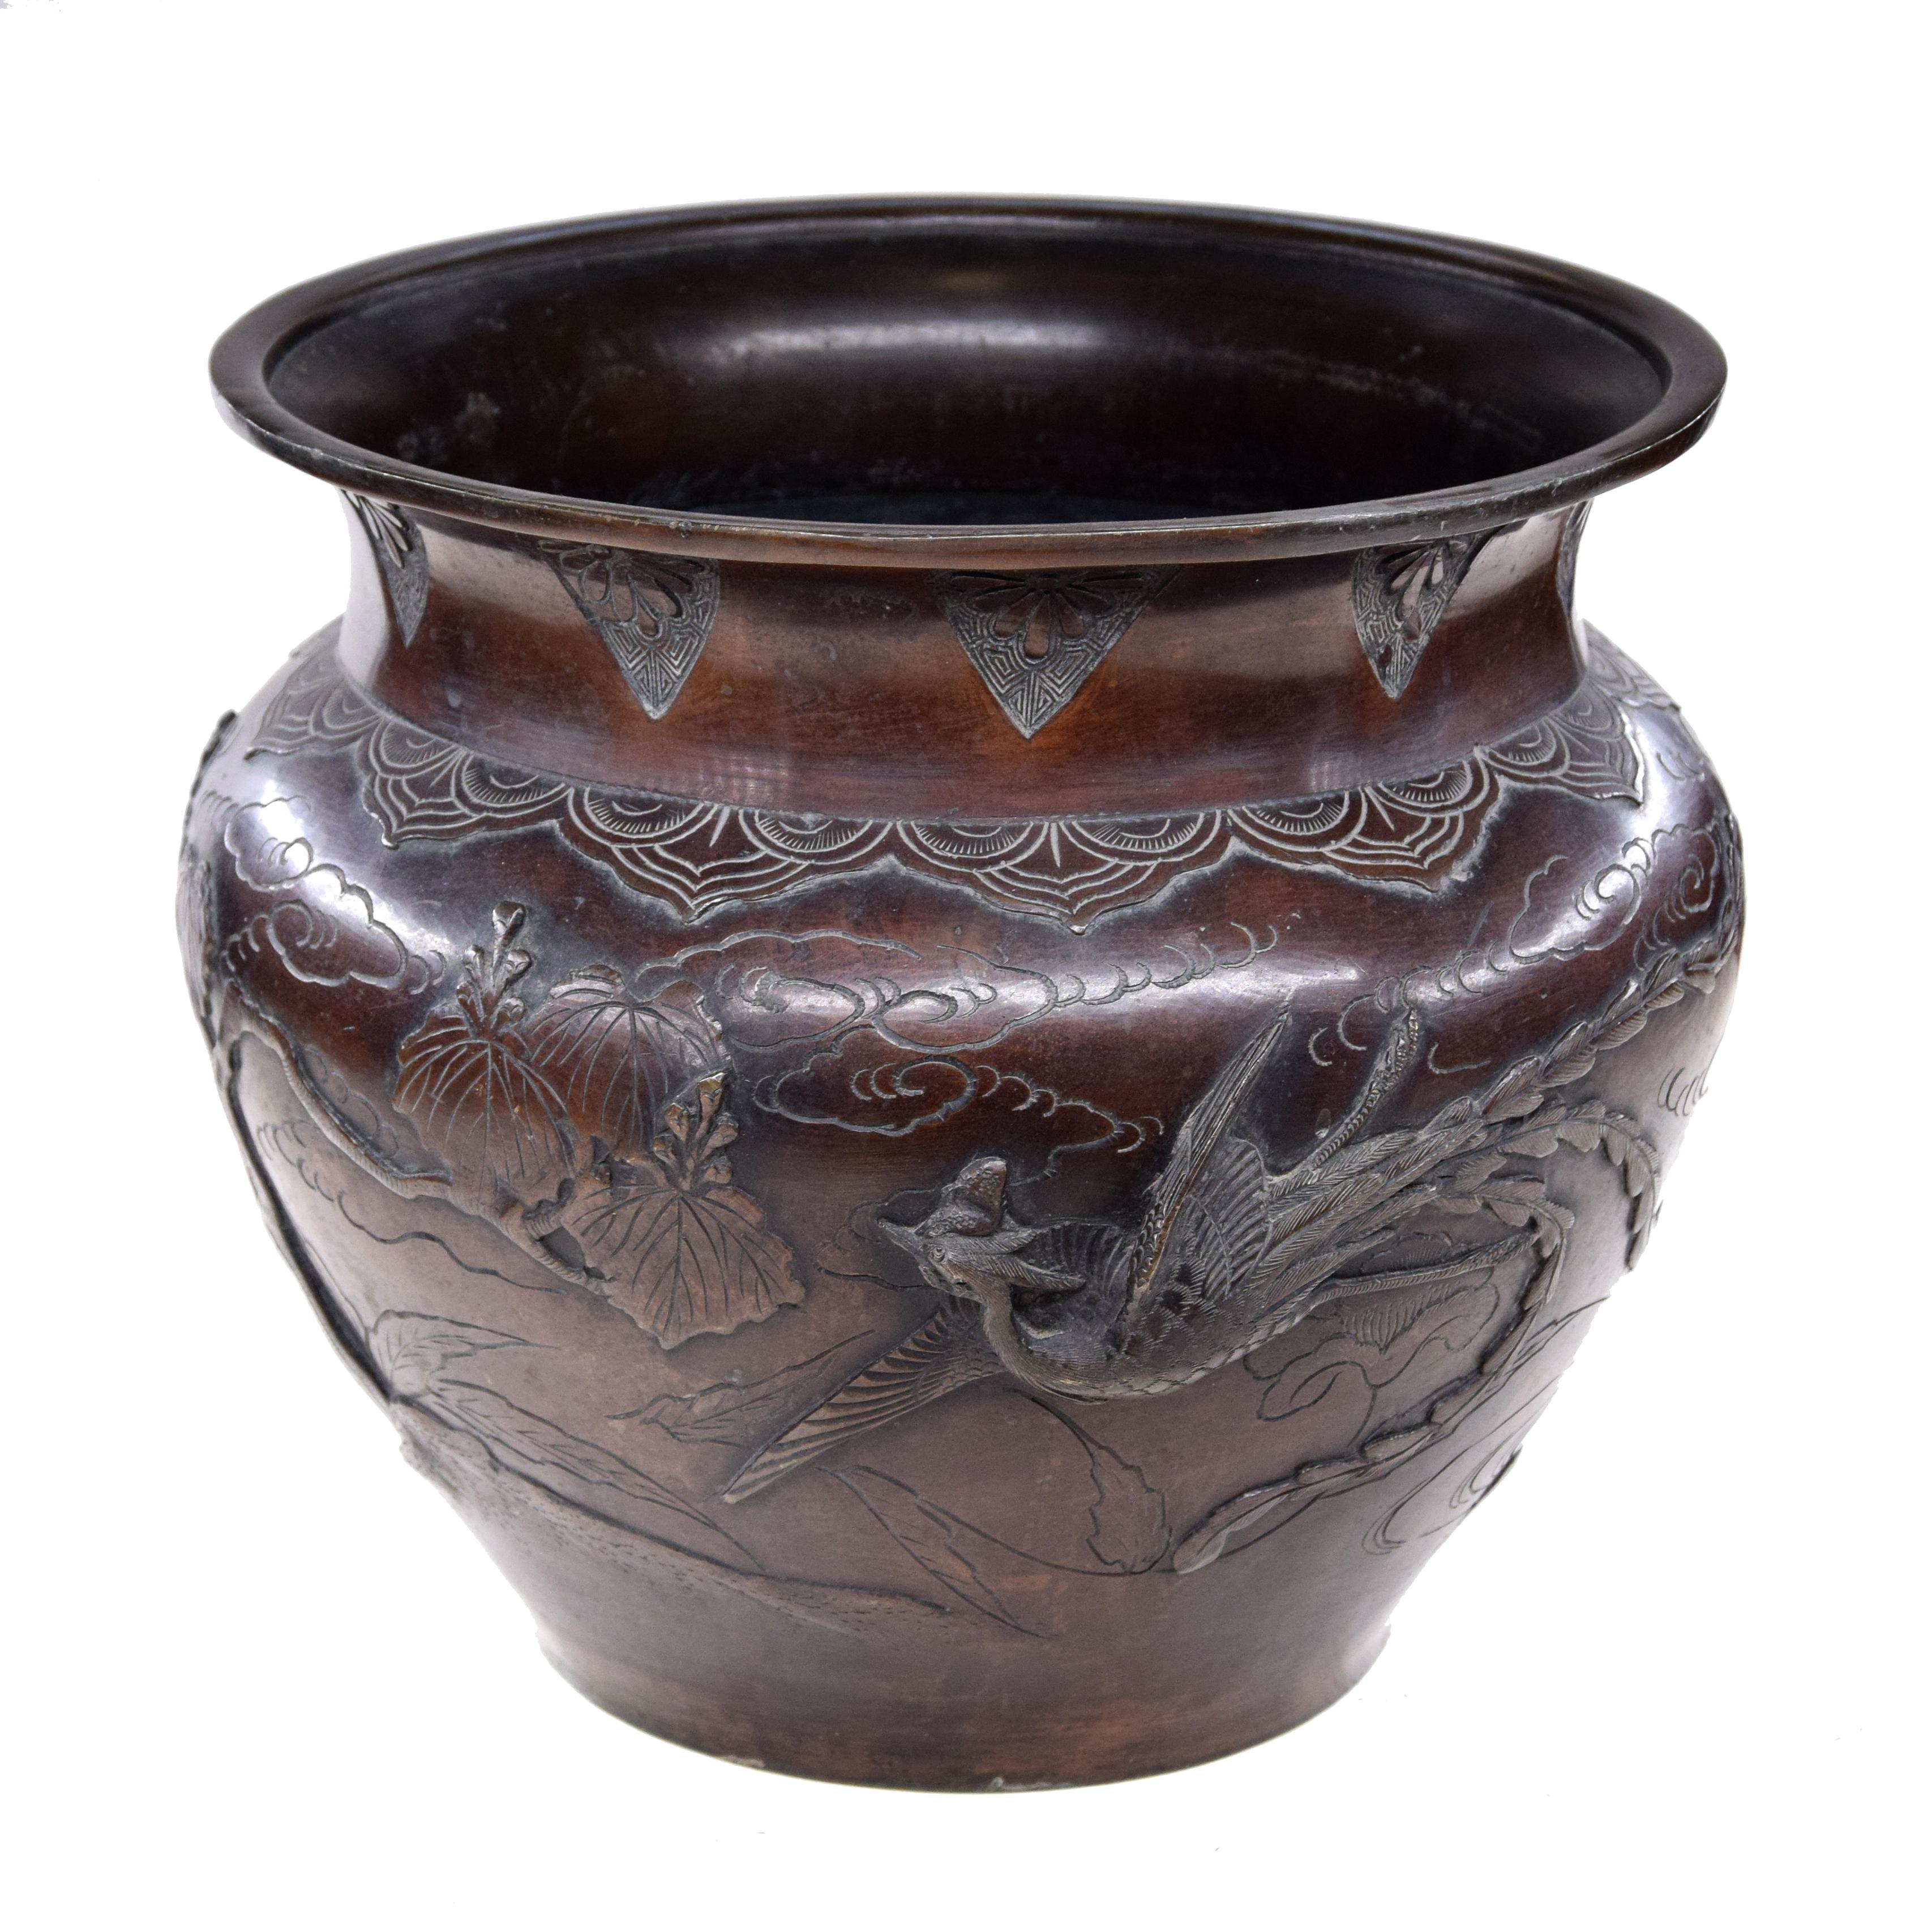 Bronze cachepot is a bronze decorative object realized by Anonymous designer between the end of the 19th century and the beginning of the 20th century, in Japan during The Meiji era.

Good conditions.

This beautiful cachepot was realized in